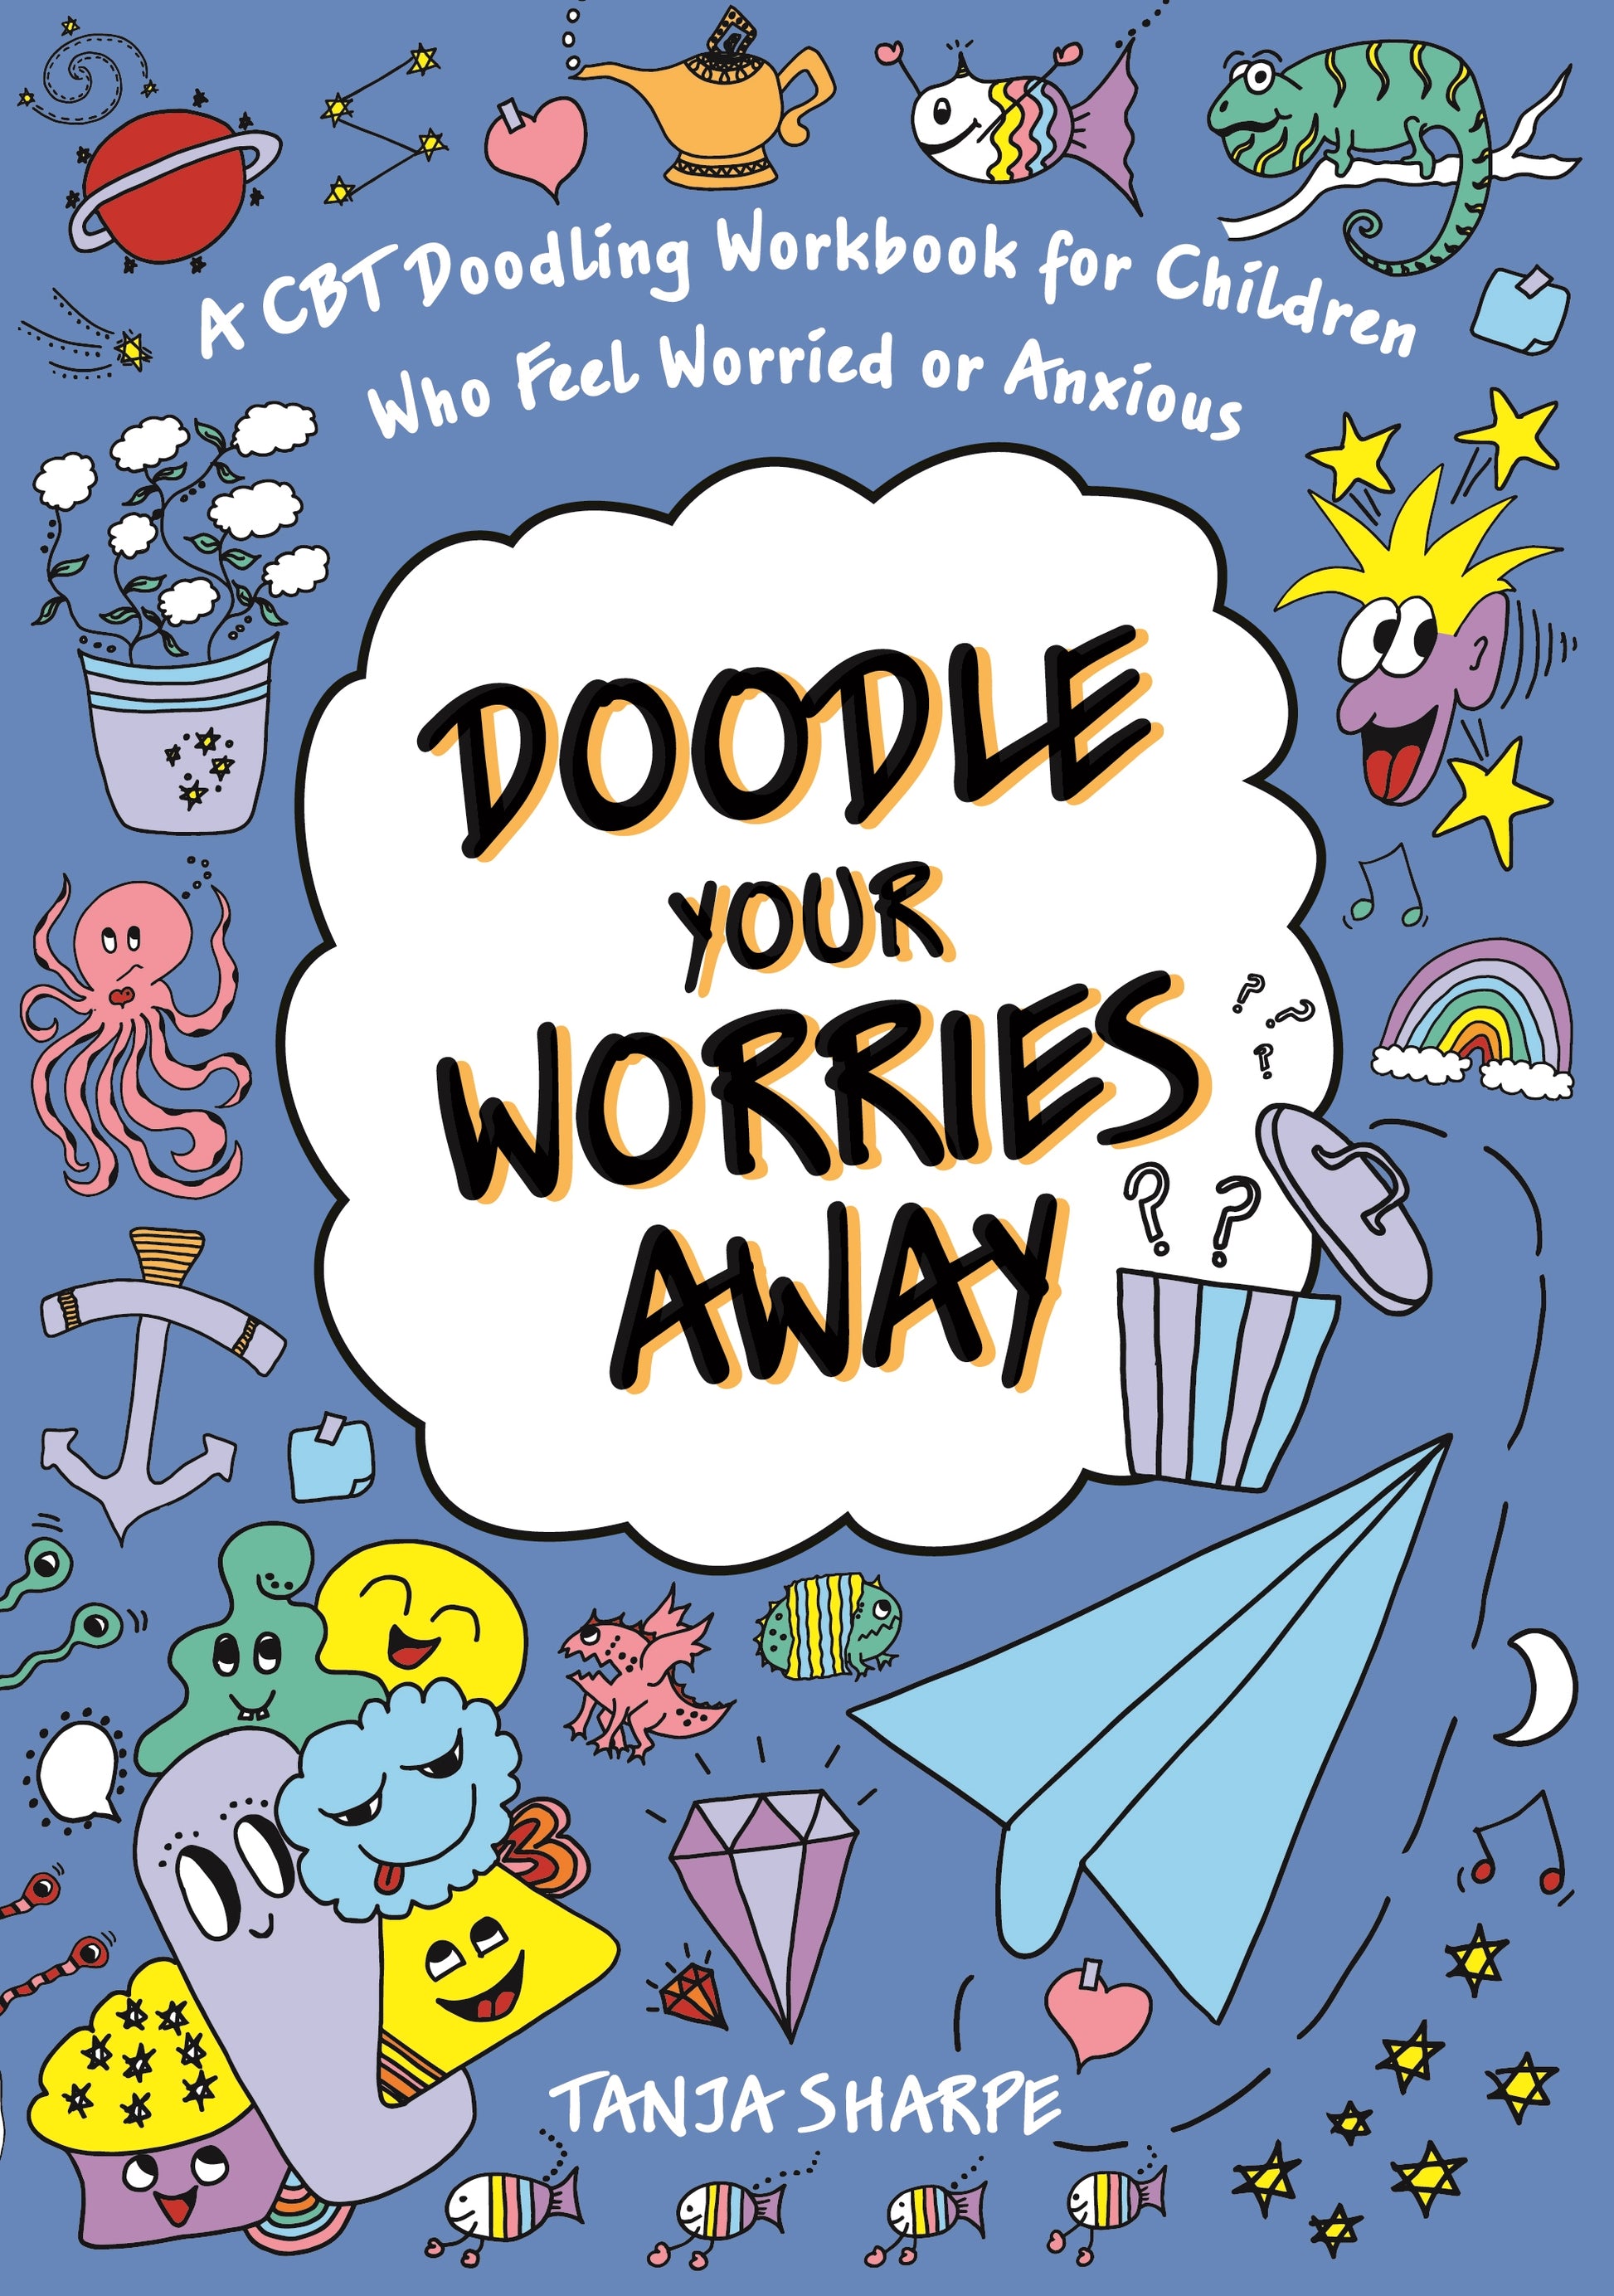 Doodle Your Worries Away by Suzanne Alderson, Tanja Sharpe